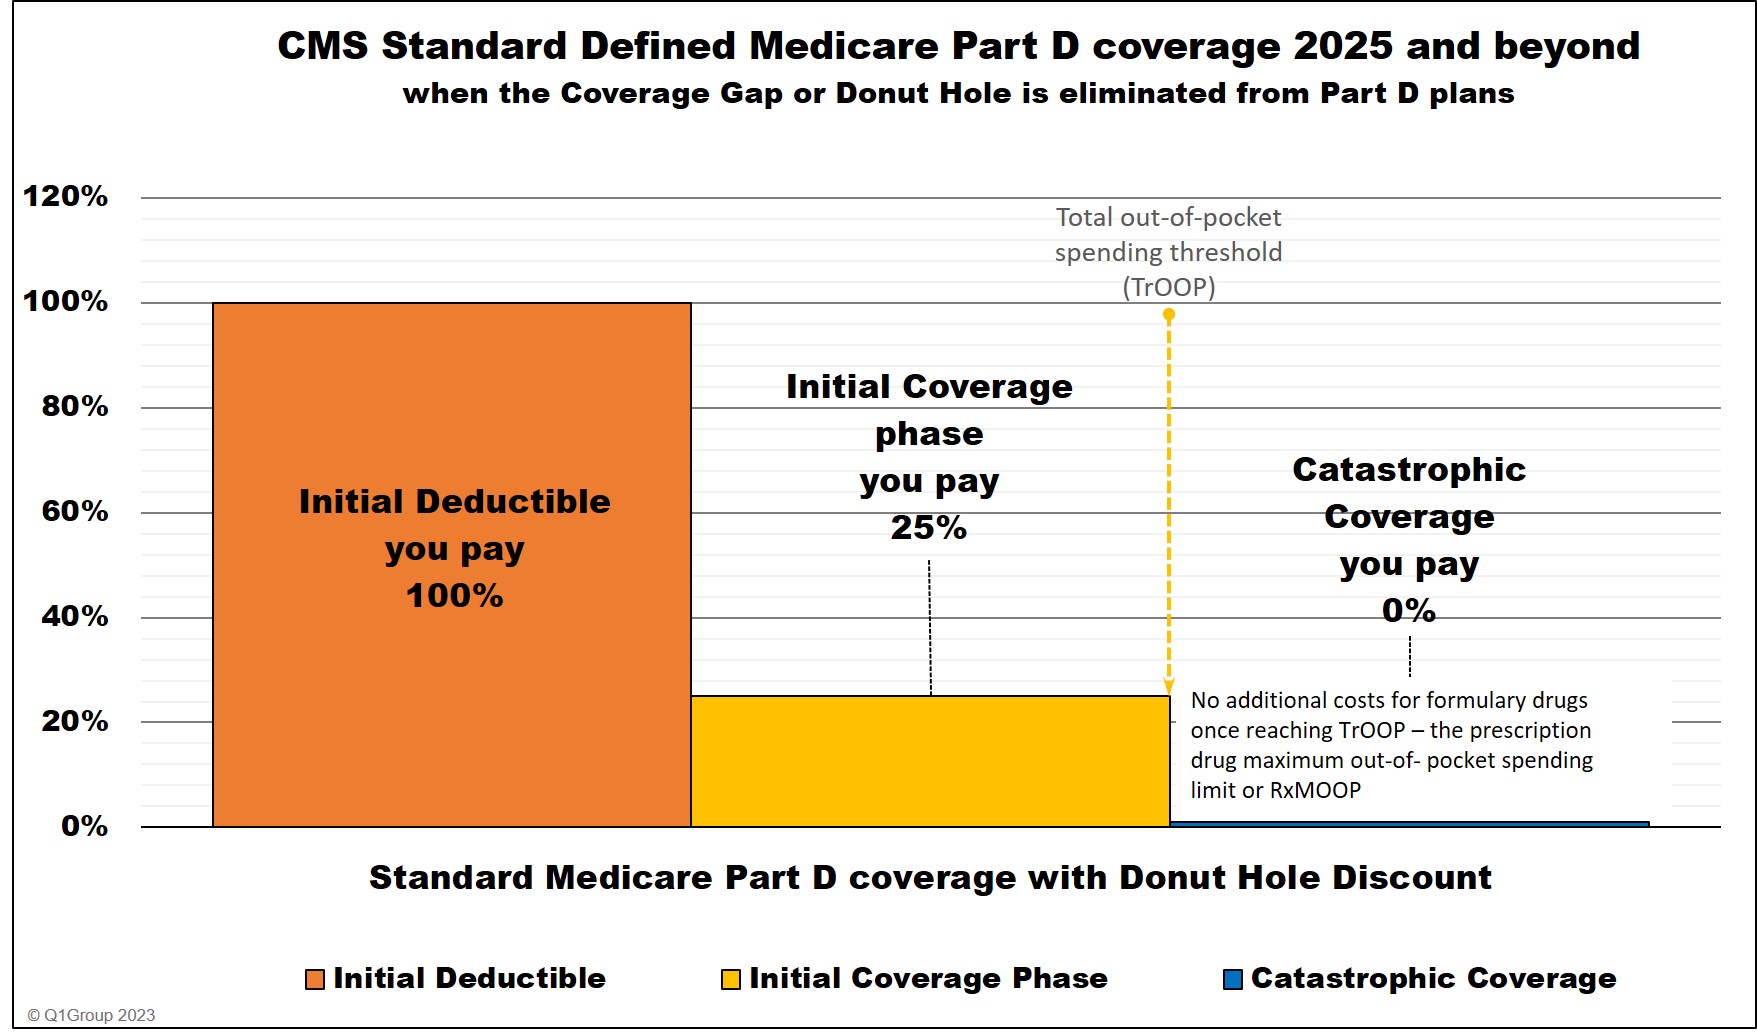 Phases of your Medicare Part D coverage 2025 and beyond